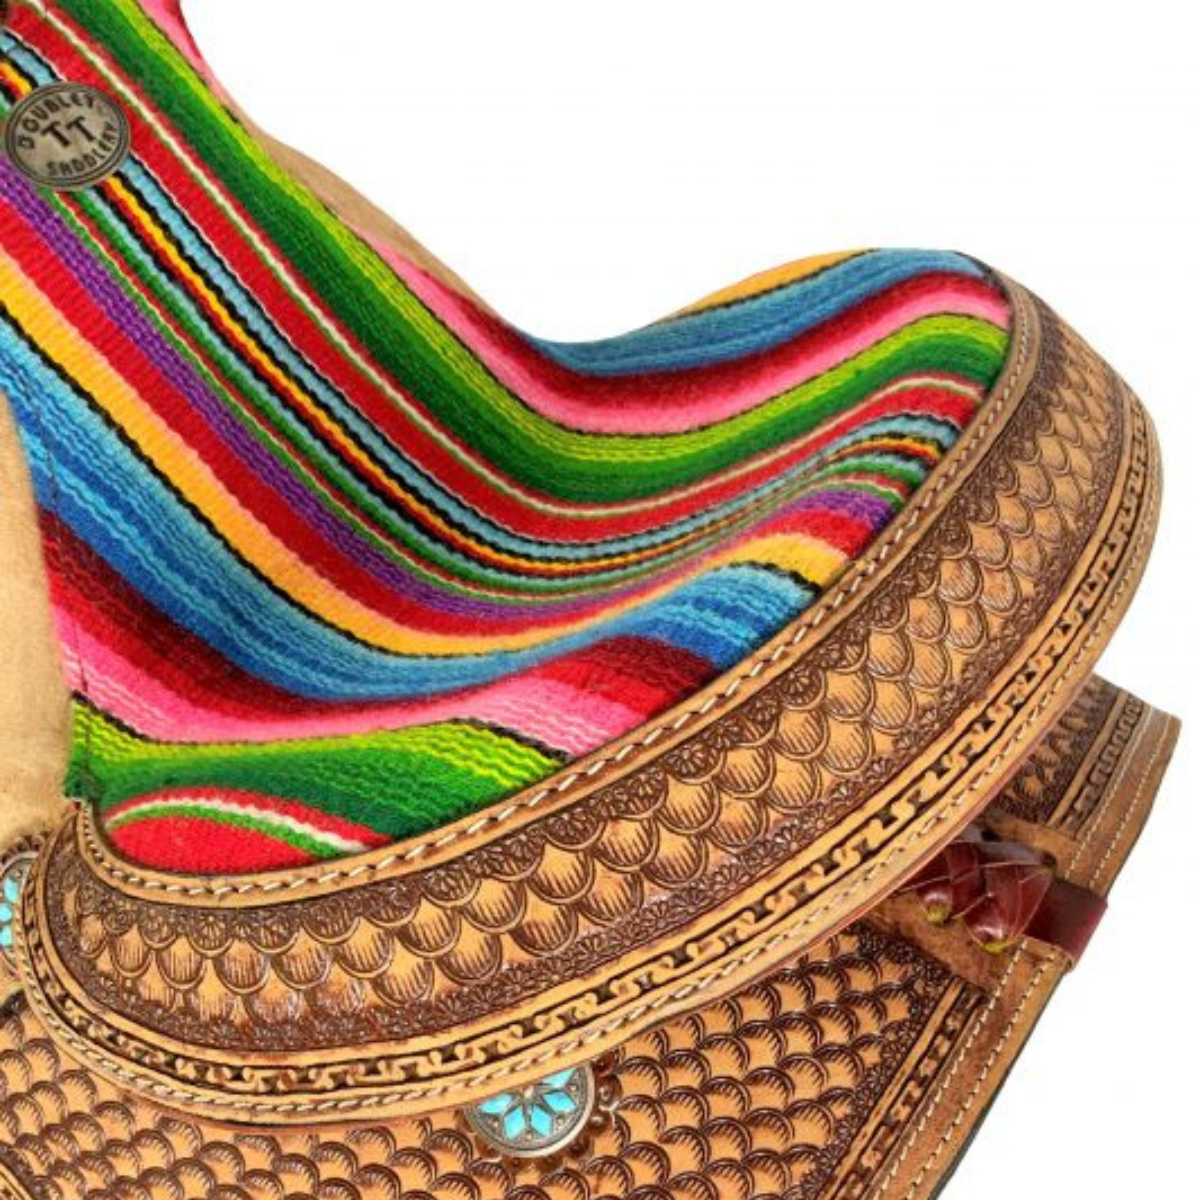 14" Double T  Youth Hard Seat Western saddle with Wool Serape Accents - Double T Saddles